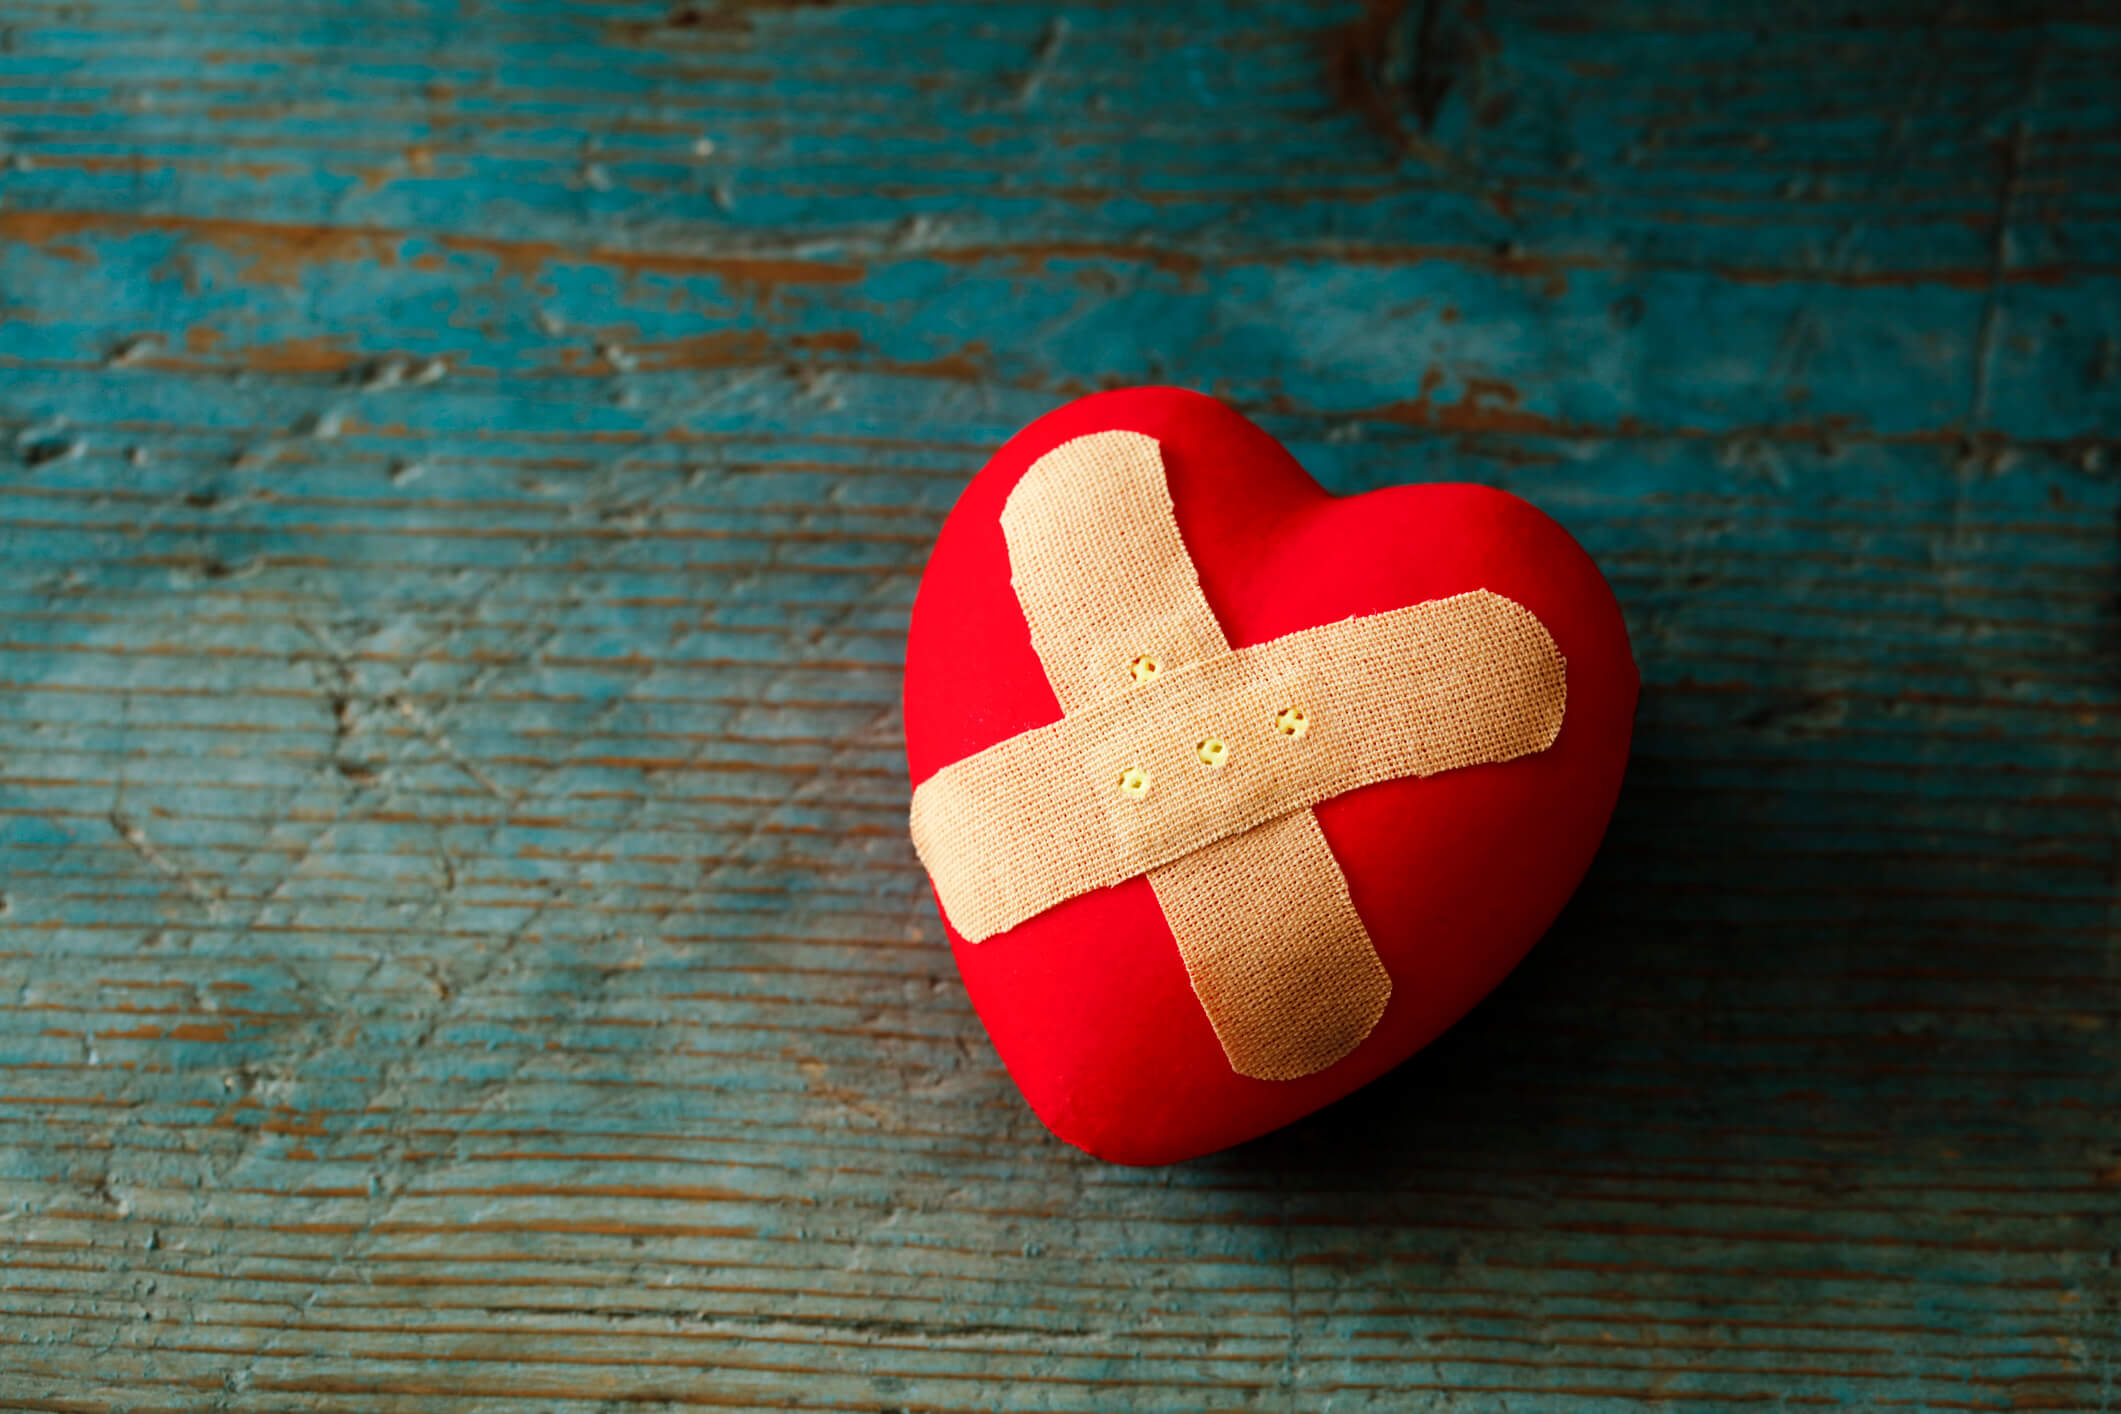 A red heart with a Band-Aid on it